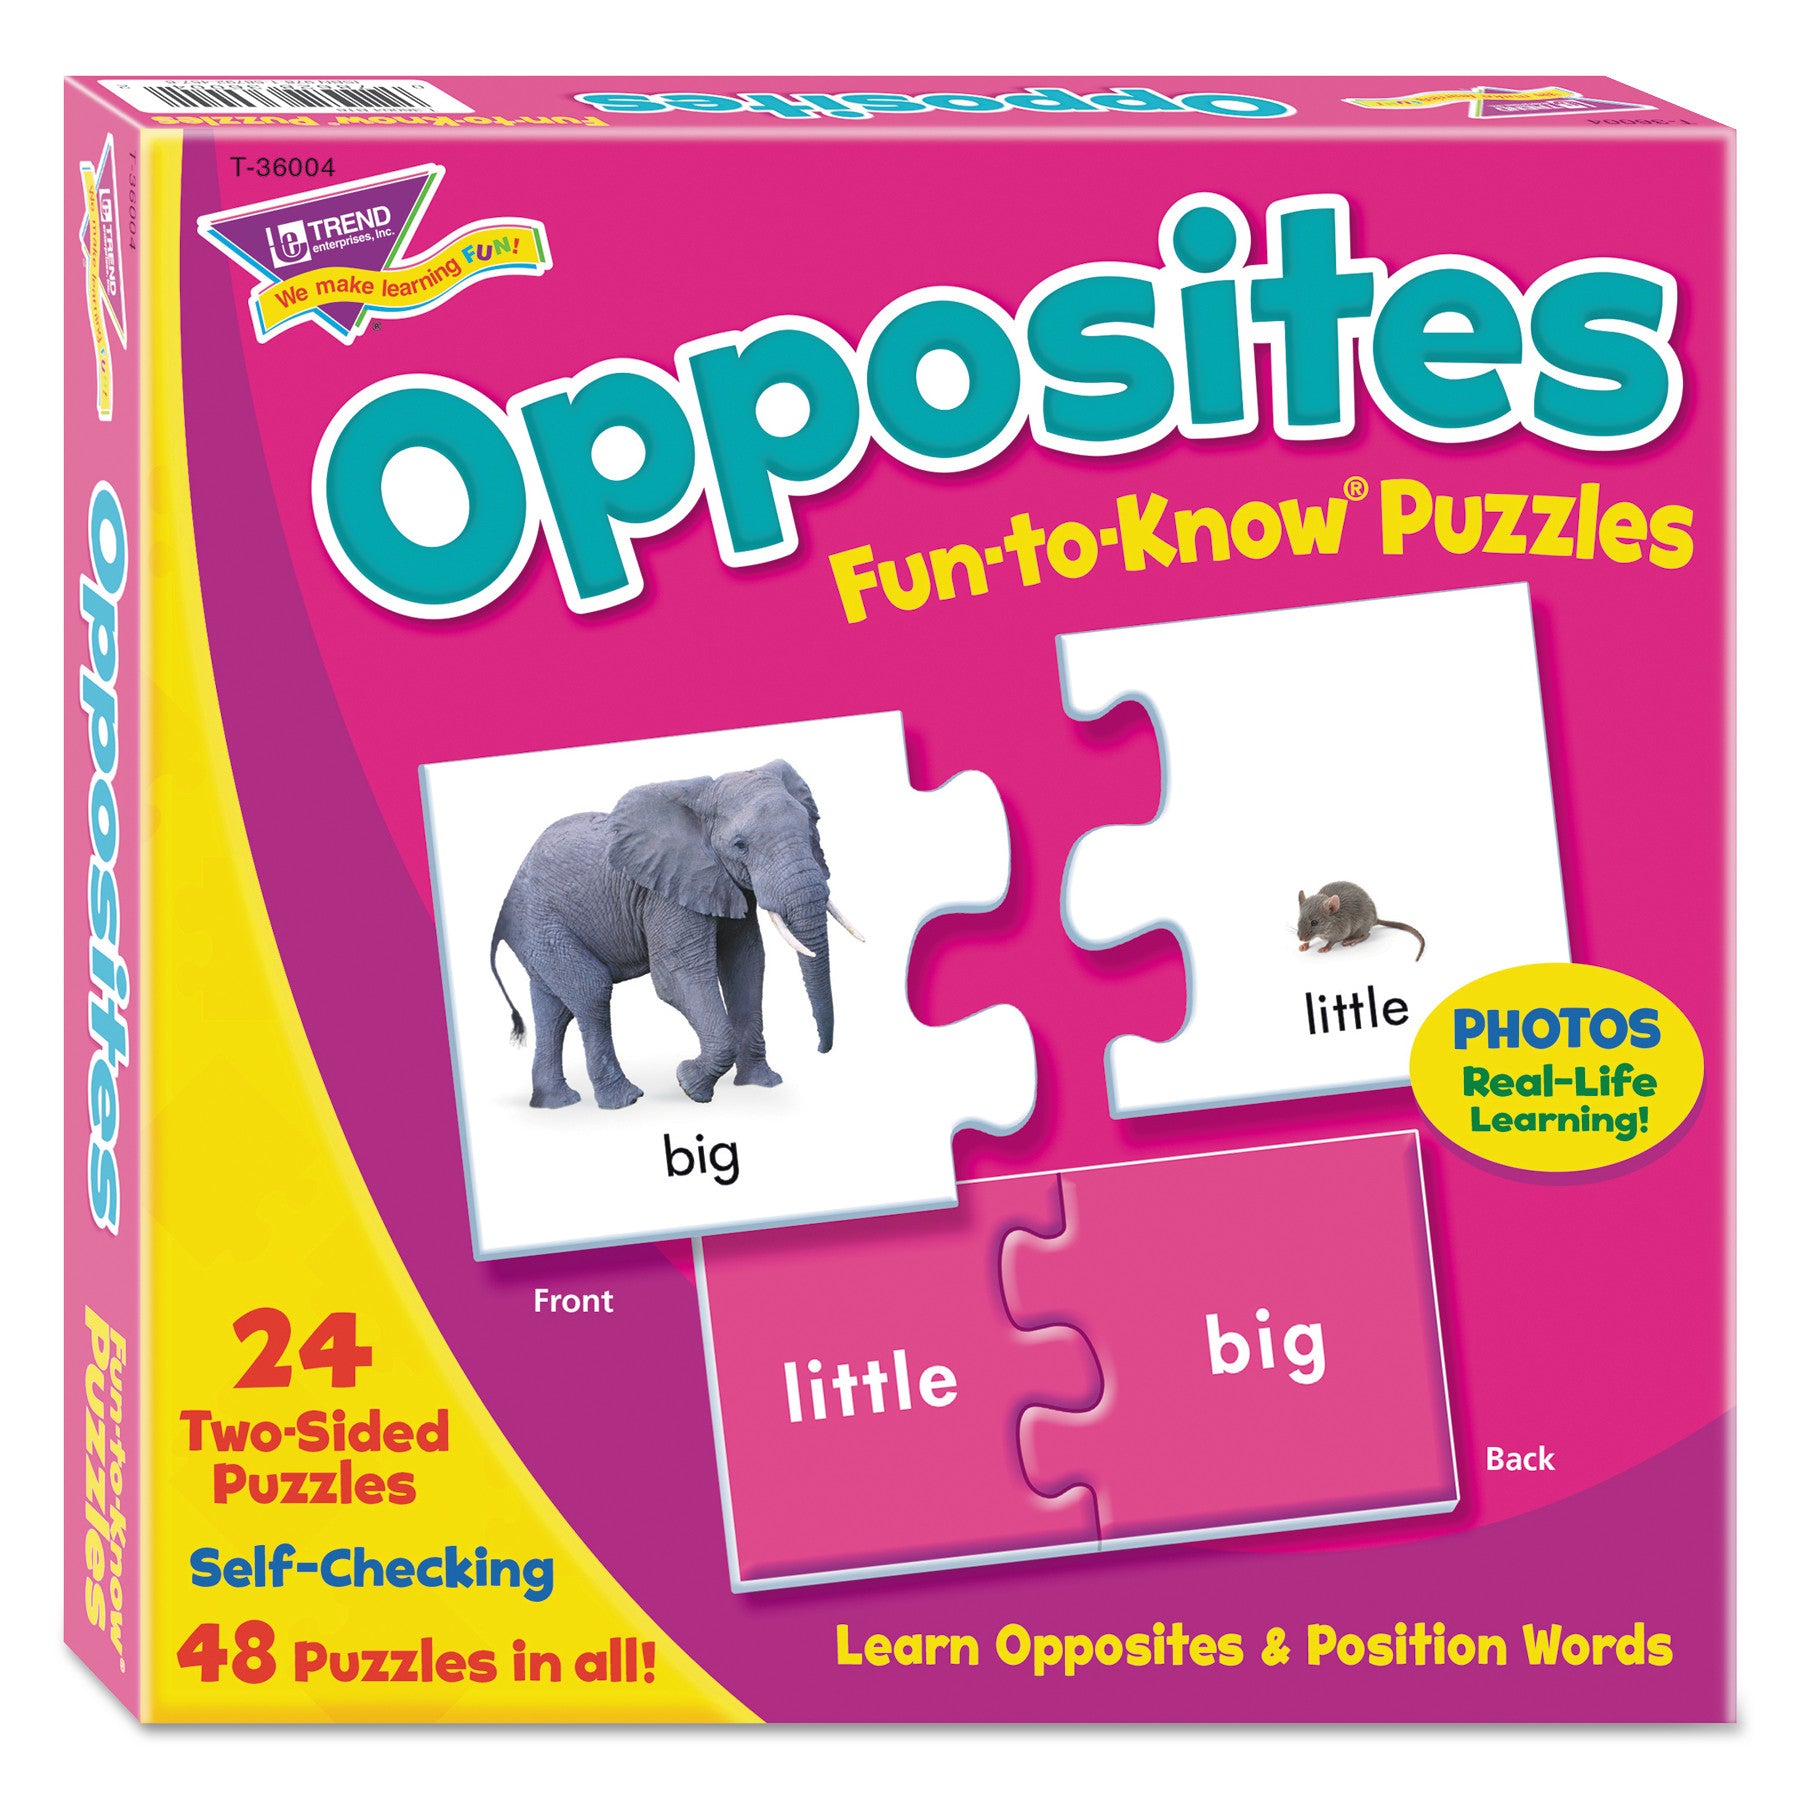 Fun to Know Puzzles, Opposites, Ages 3 and Up, 24 Puzzles - 